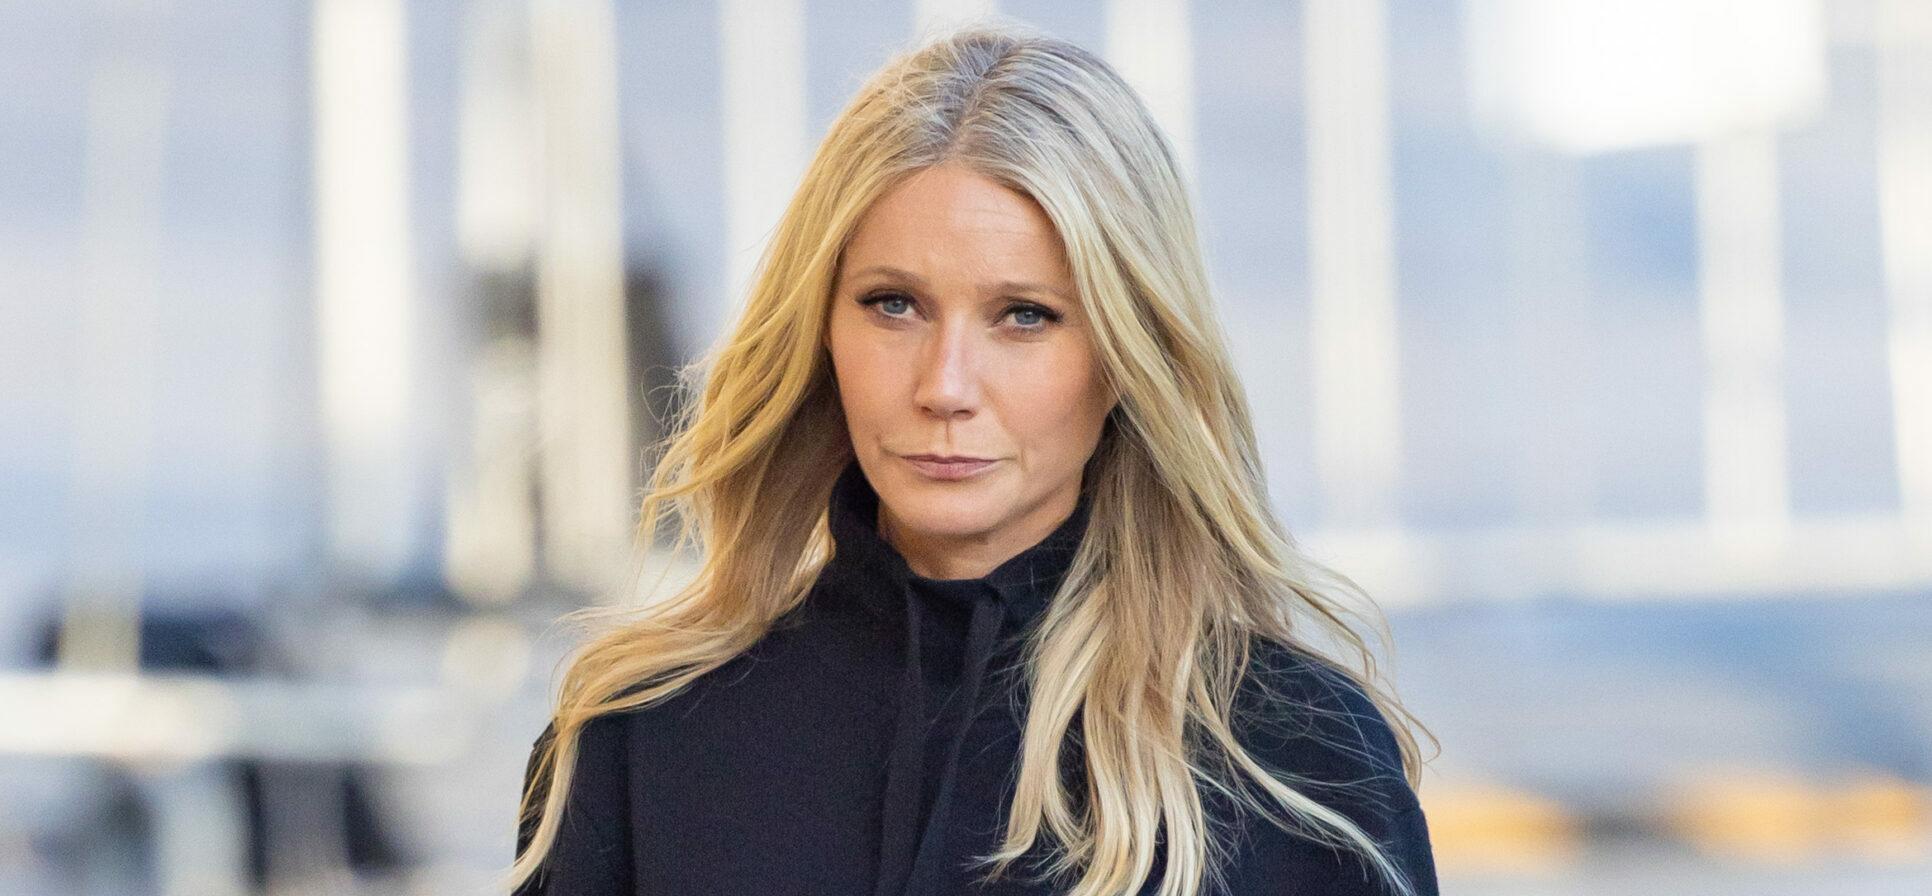 Gwyneth Paltrow’s Family Set To Take The Stand In Her Ski Crash Trial